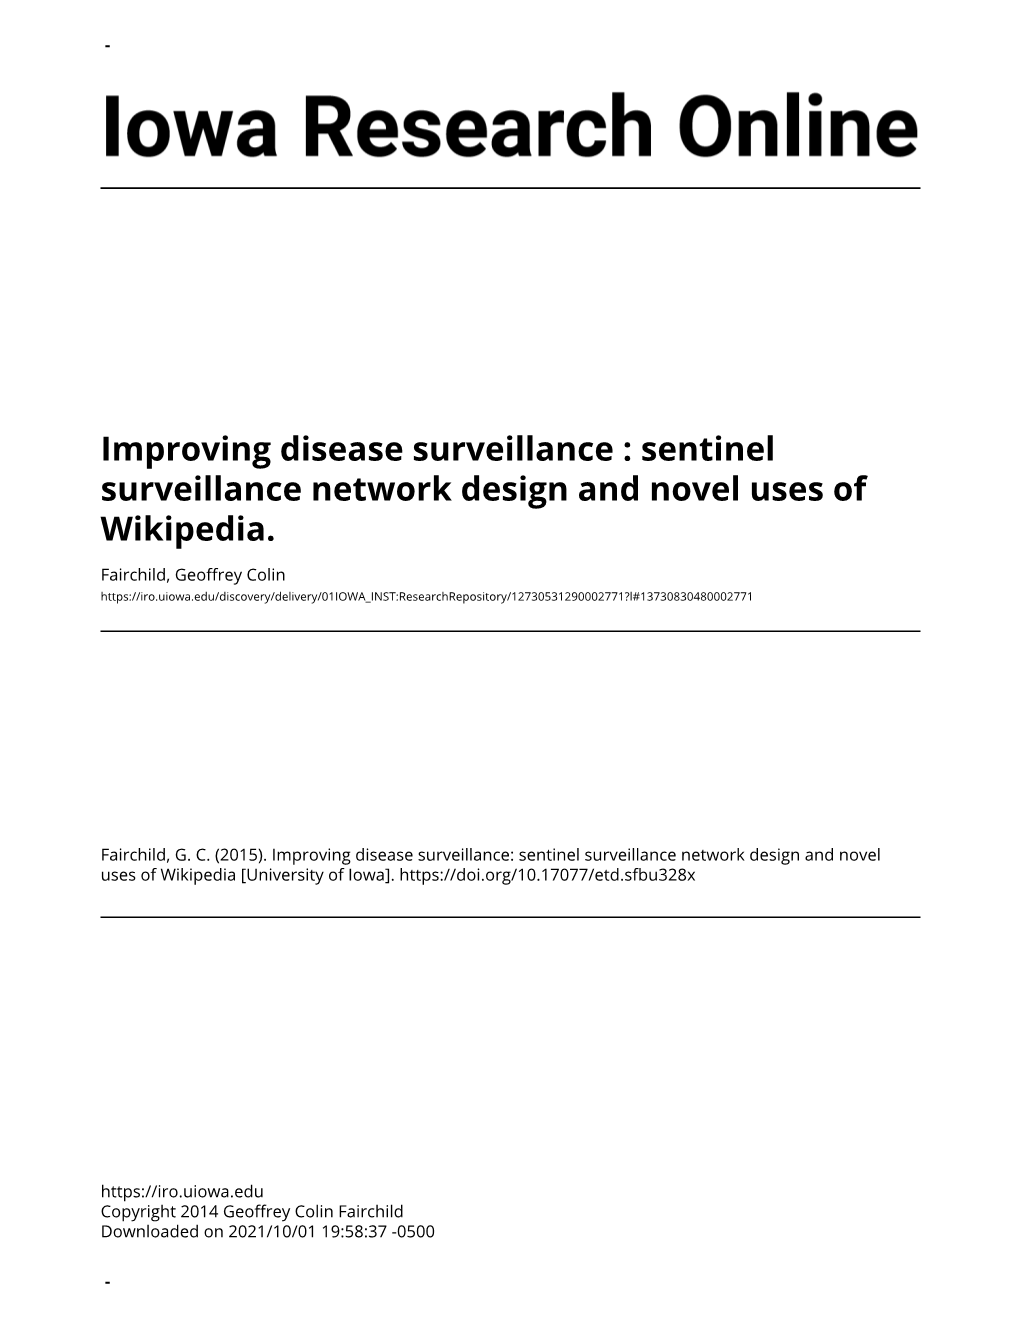 Sentinel Surveillance Network Design and Novel Uses of Wikipedia